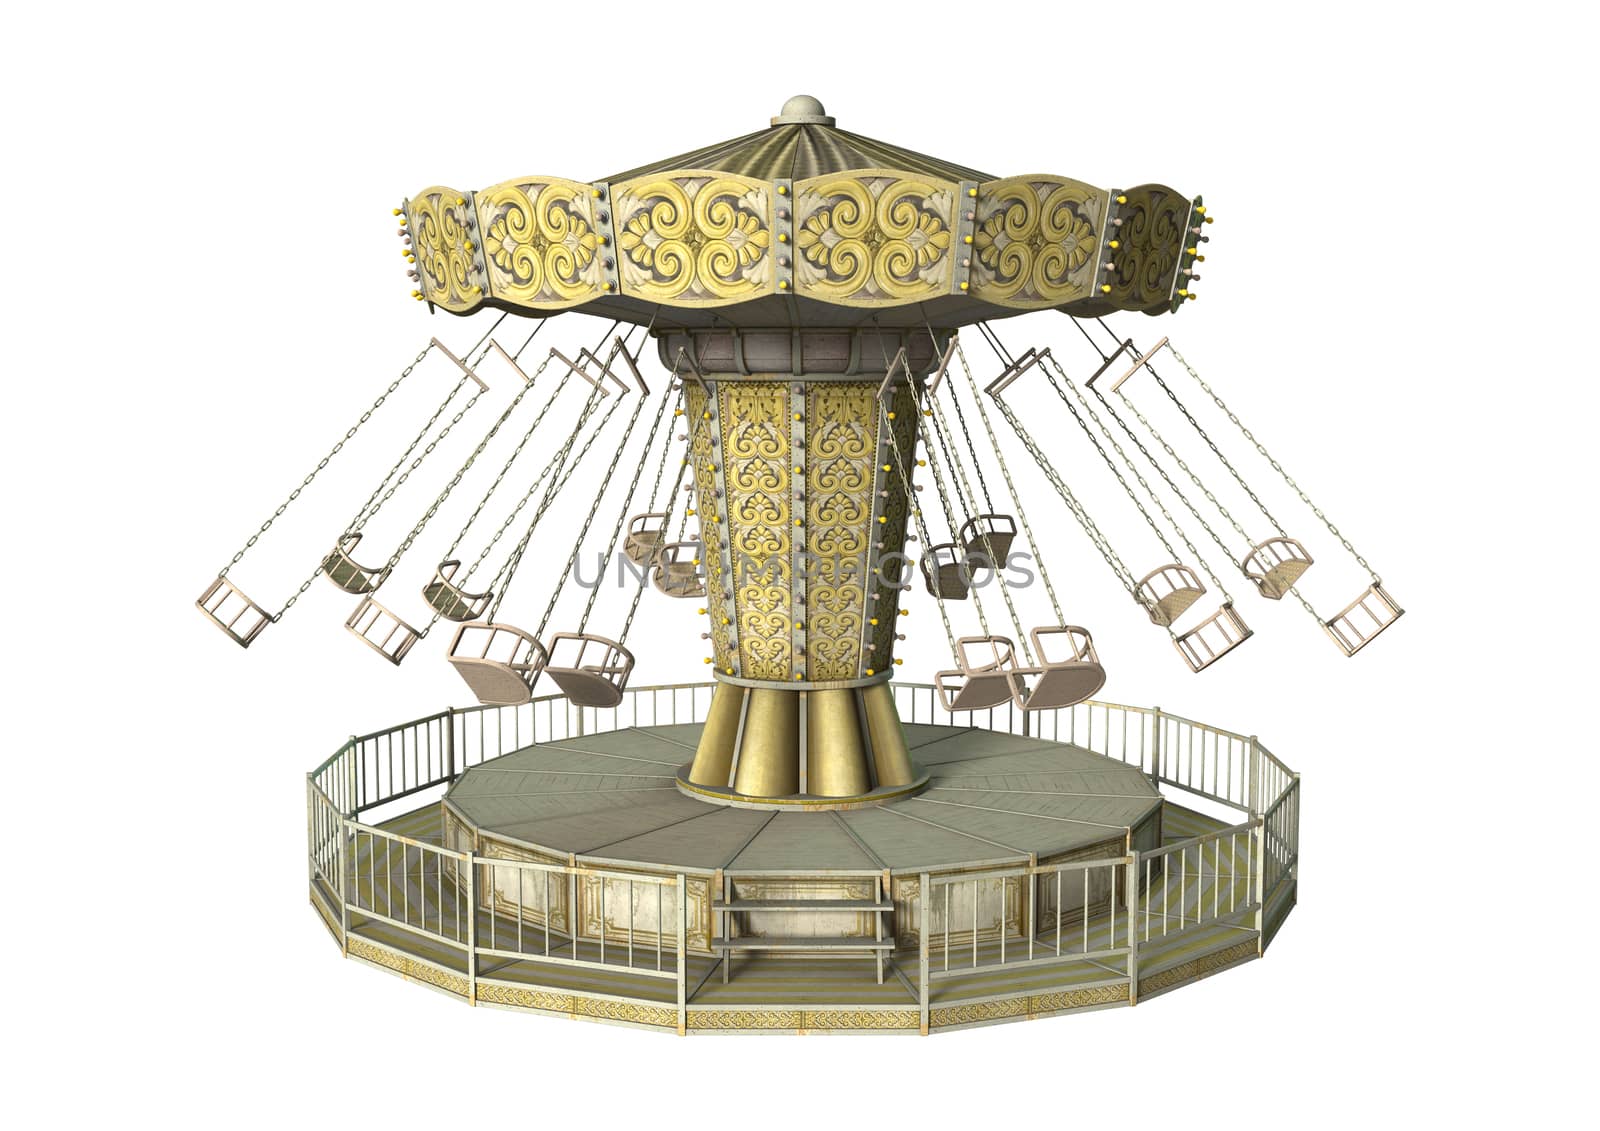 3D digital render of a vintage swing carousel isolated on white background